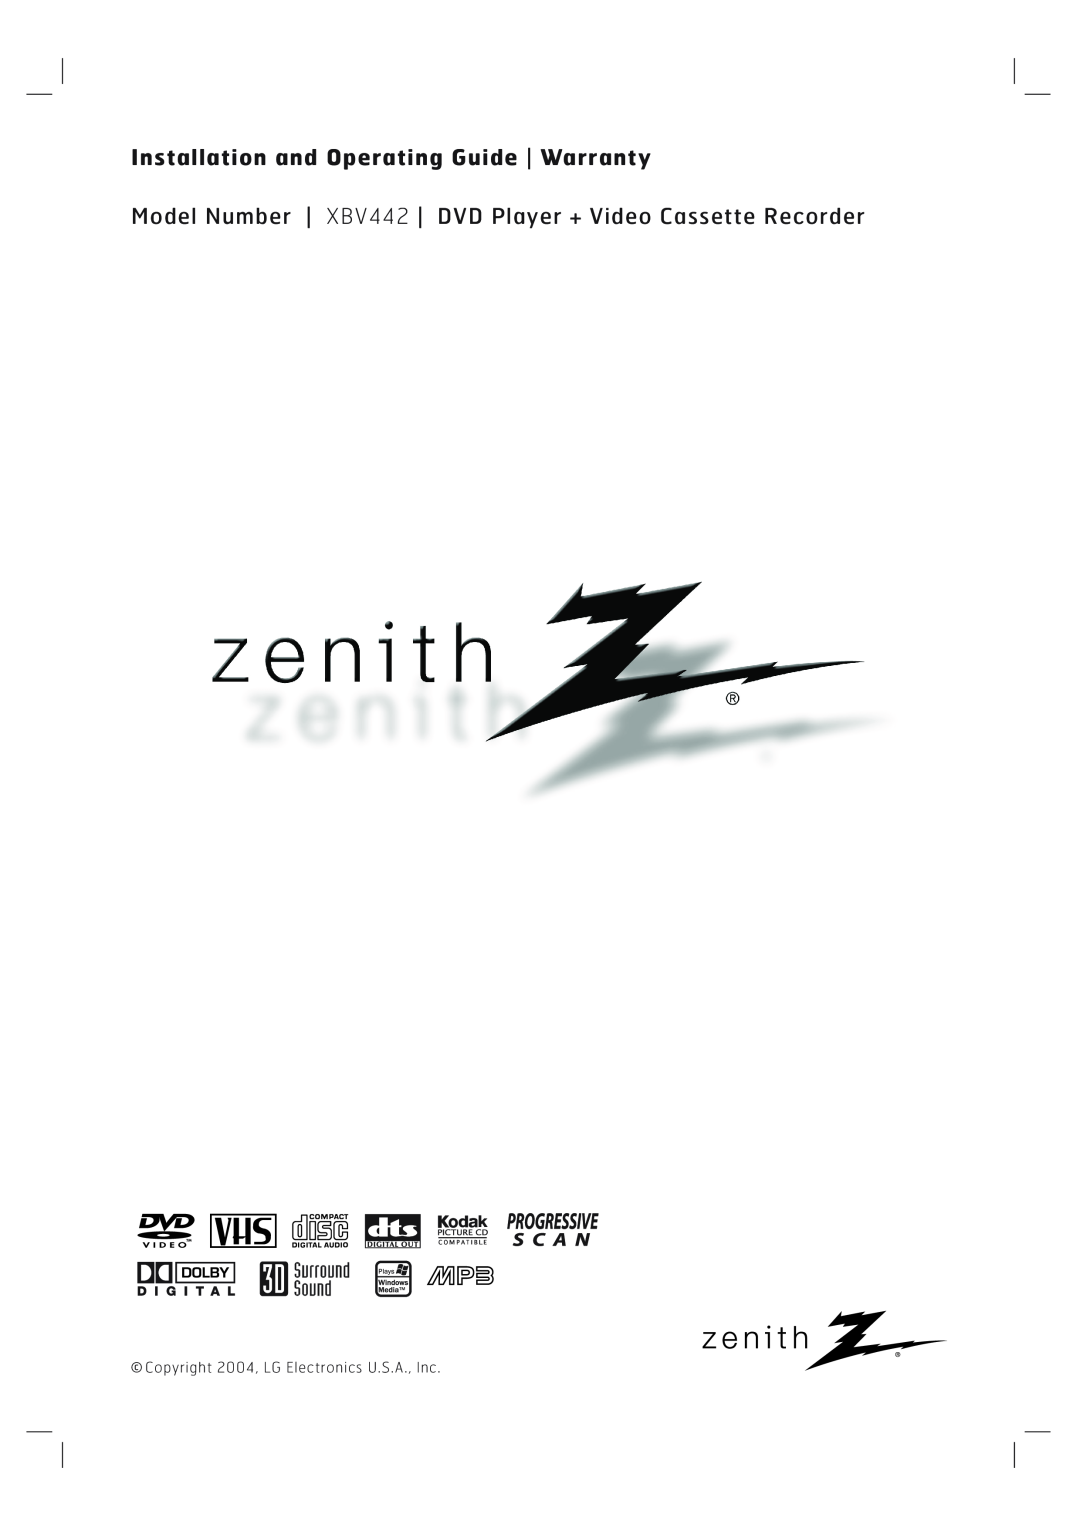 Zenith XBV 442 warranty Installation and Operating Guide Warranty, Copyright 2004, LG Electronics U.S.A., Inc 